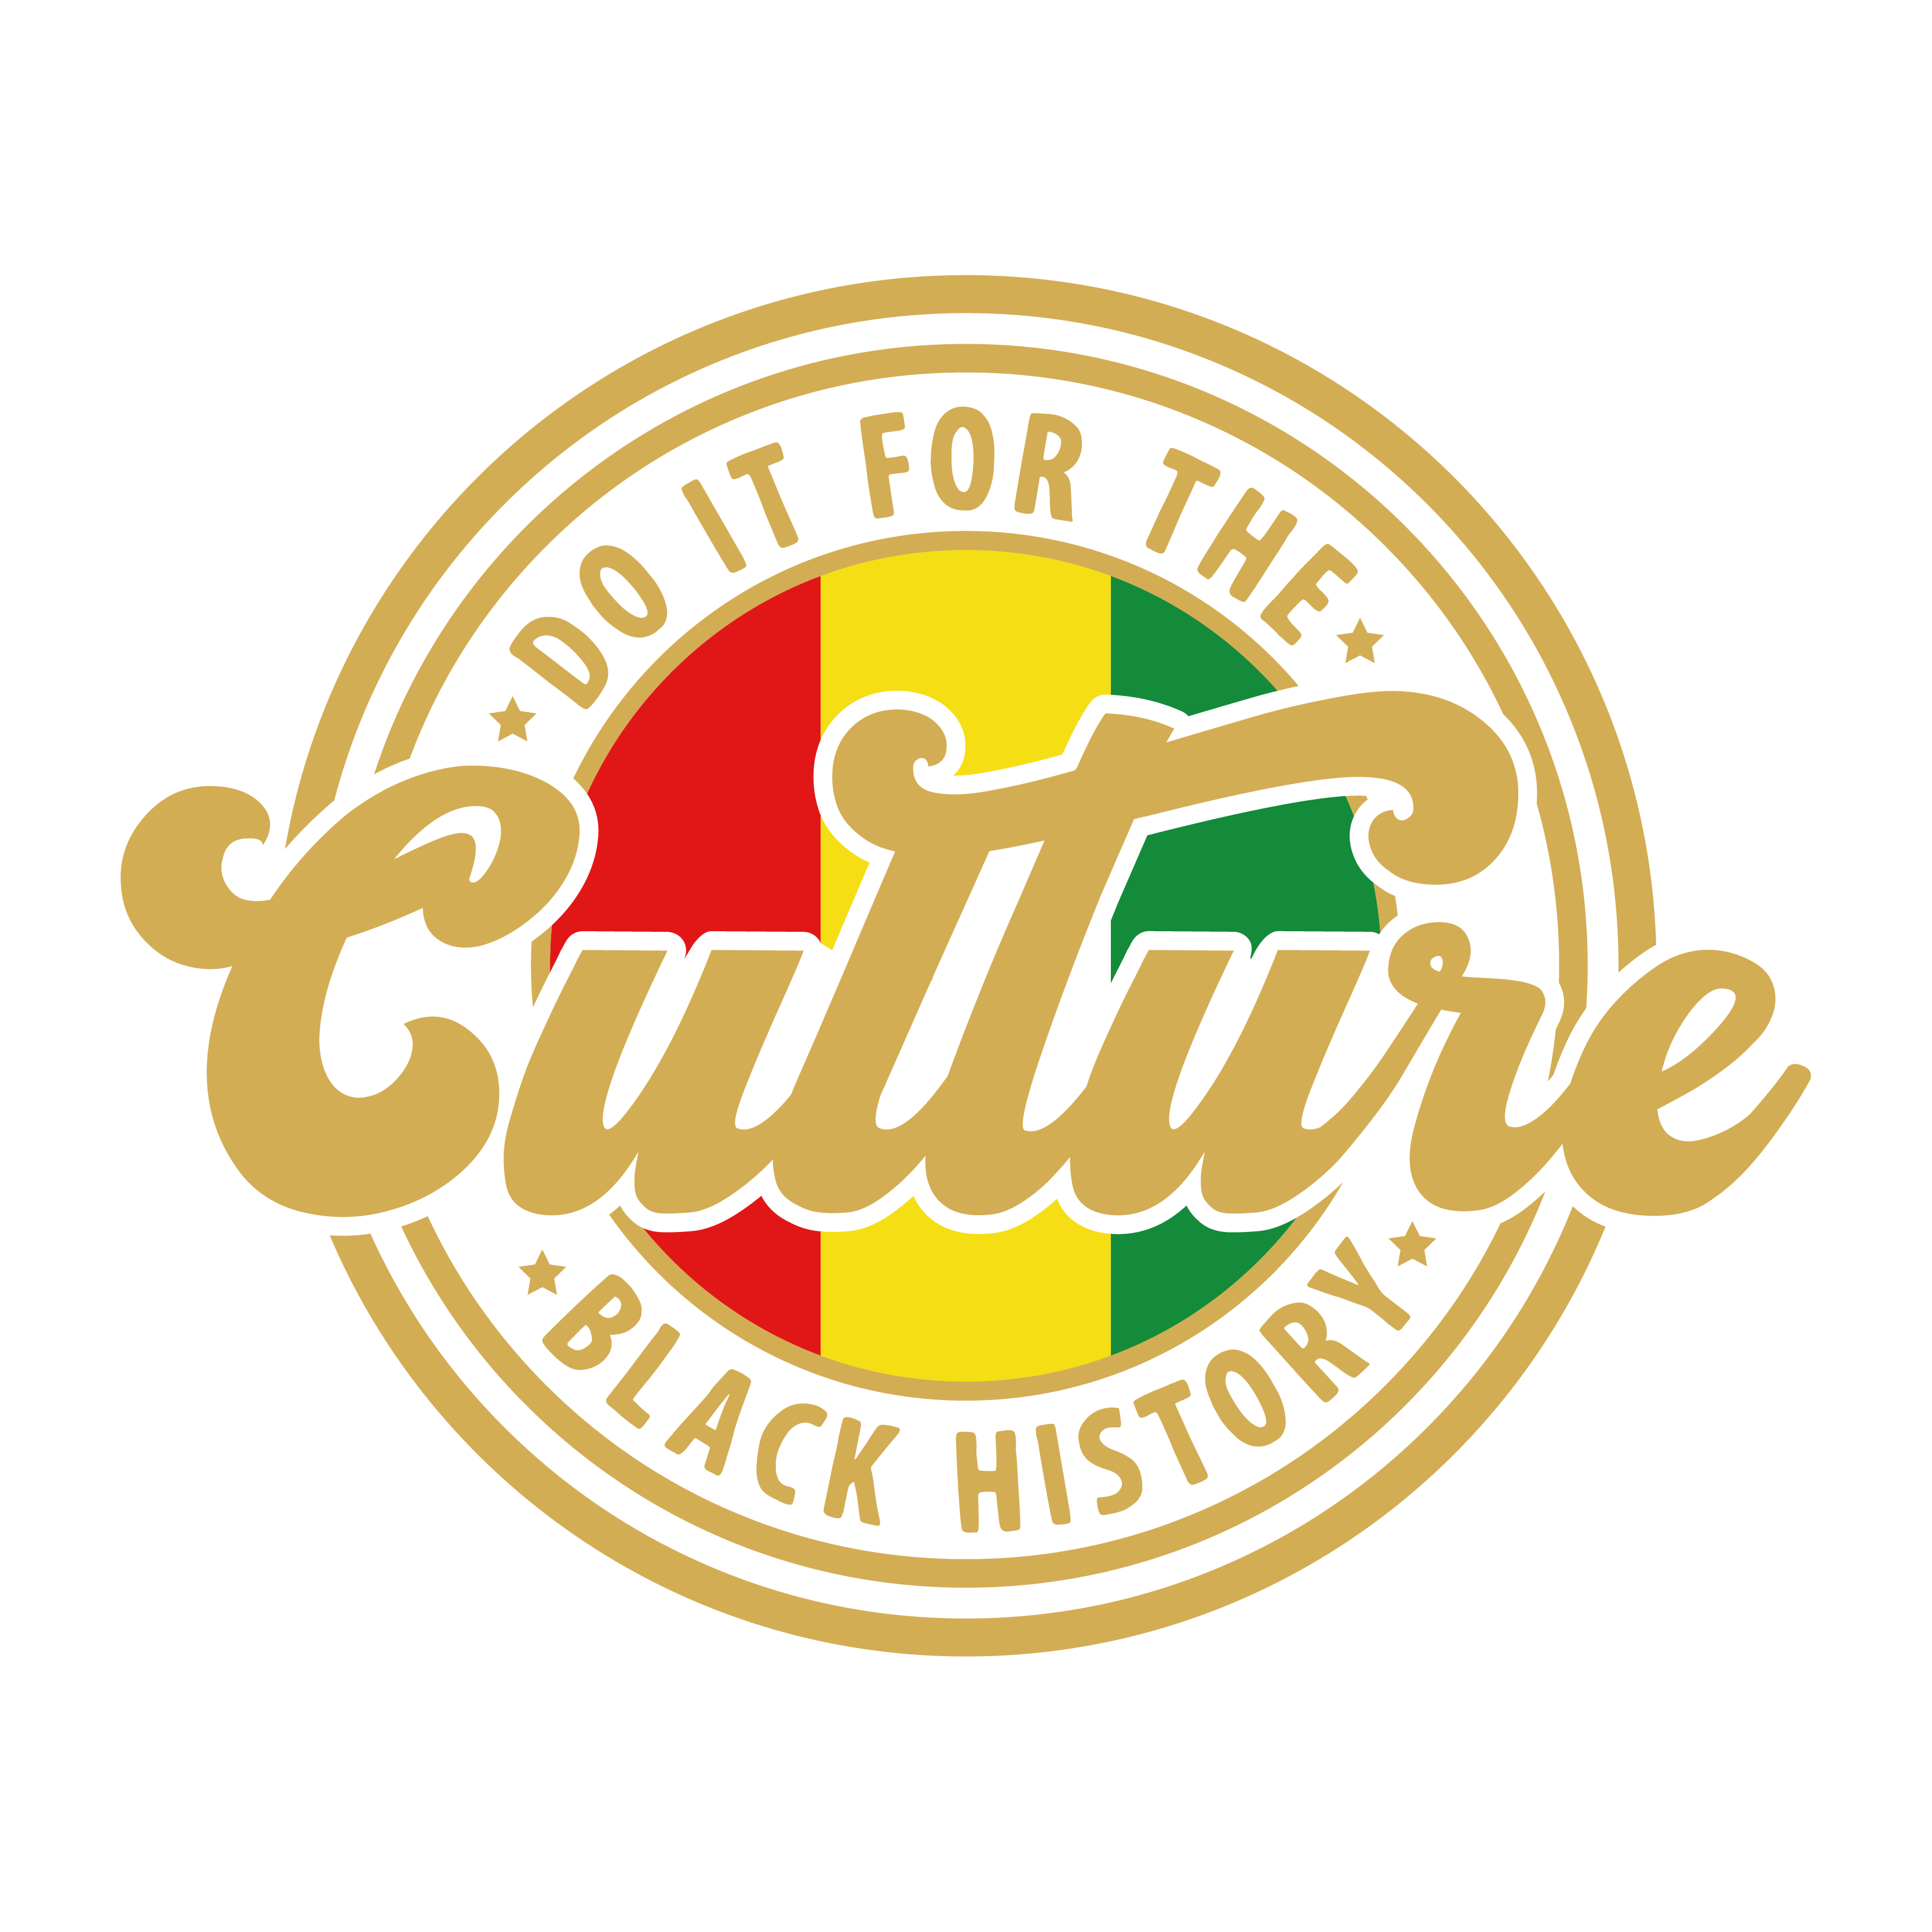 Do It For The Culture Svg, Juneteenth Svg, Black History Svg, Black History Month Svg, Black Culture, Black History Png, Svg File For Circut cover image.